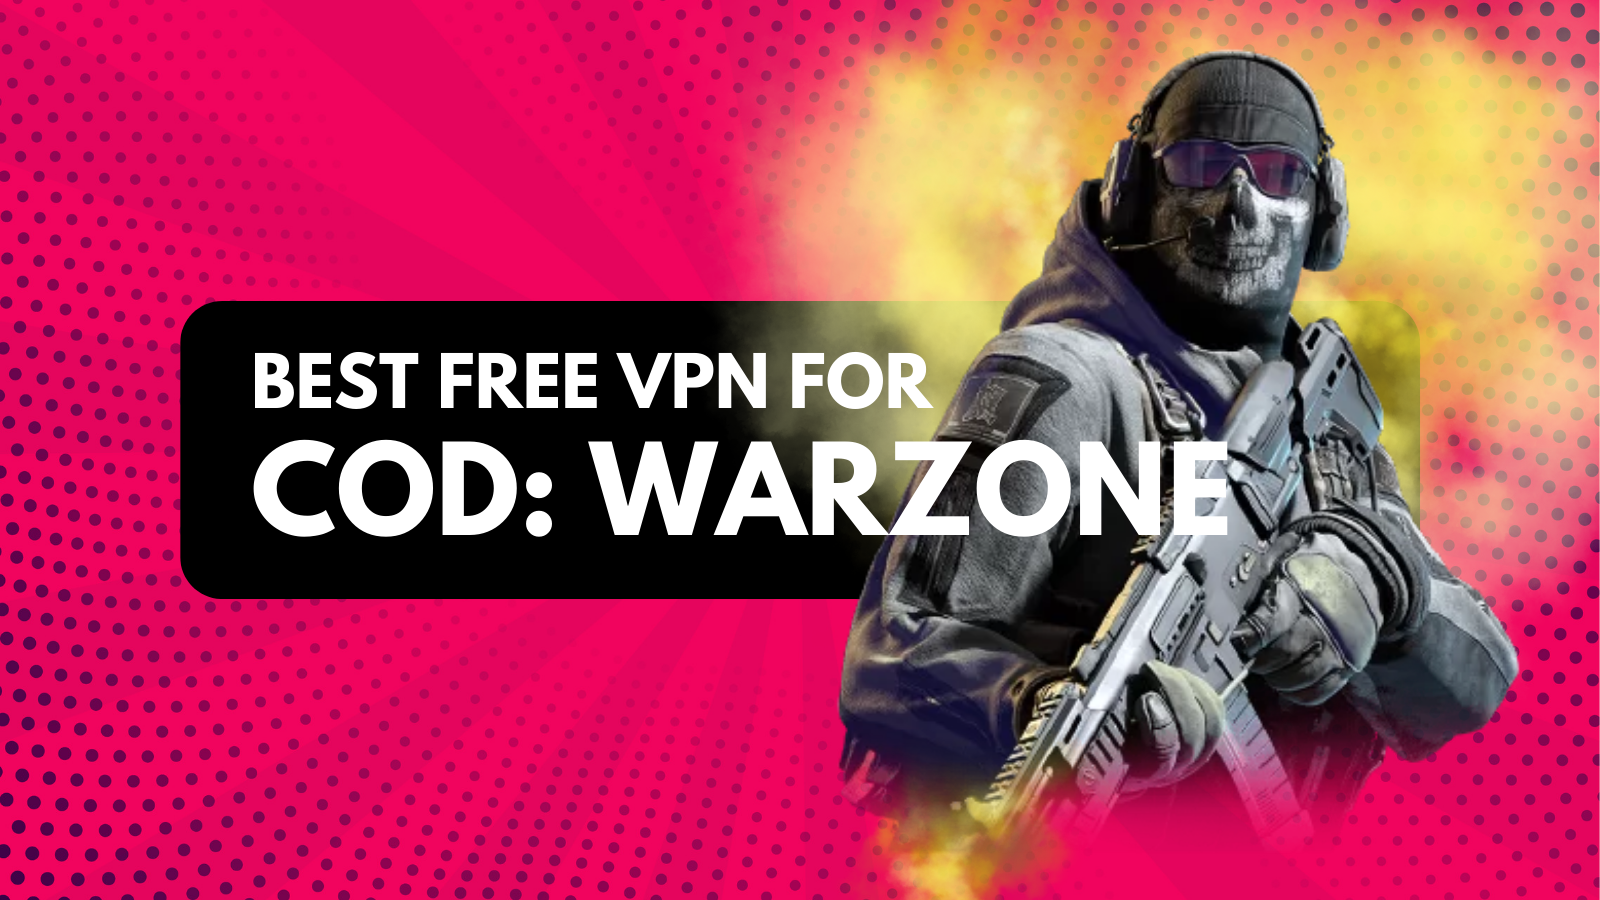 The best VPN for Call of Duty Mobile